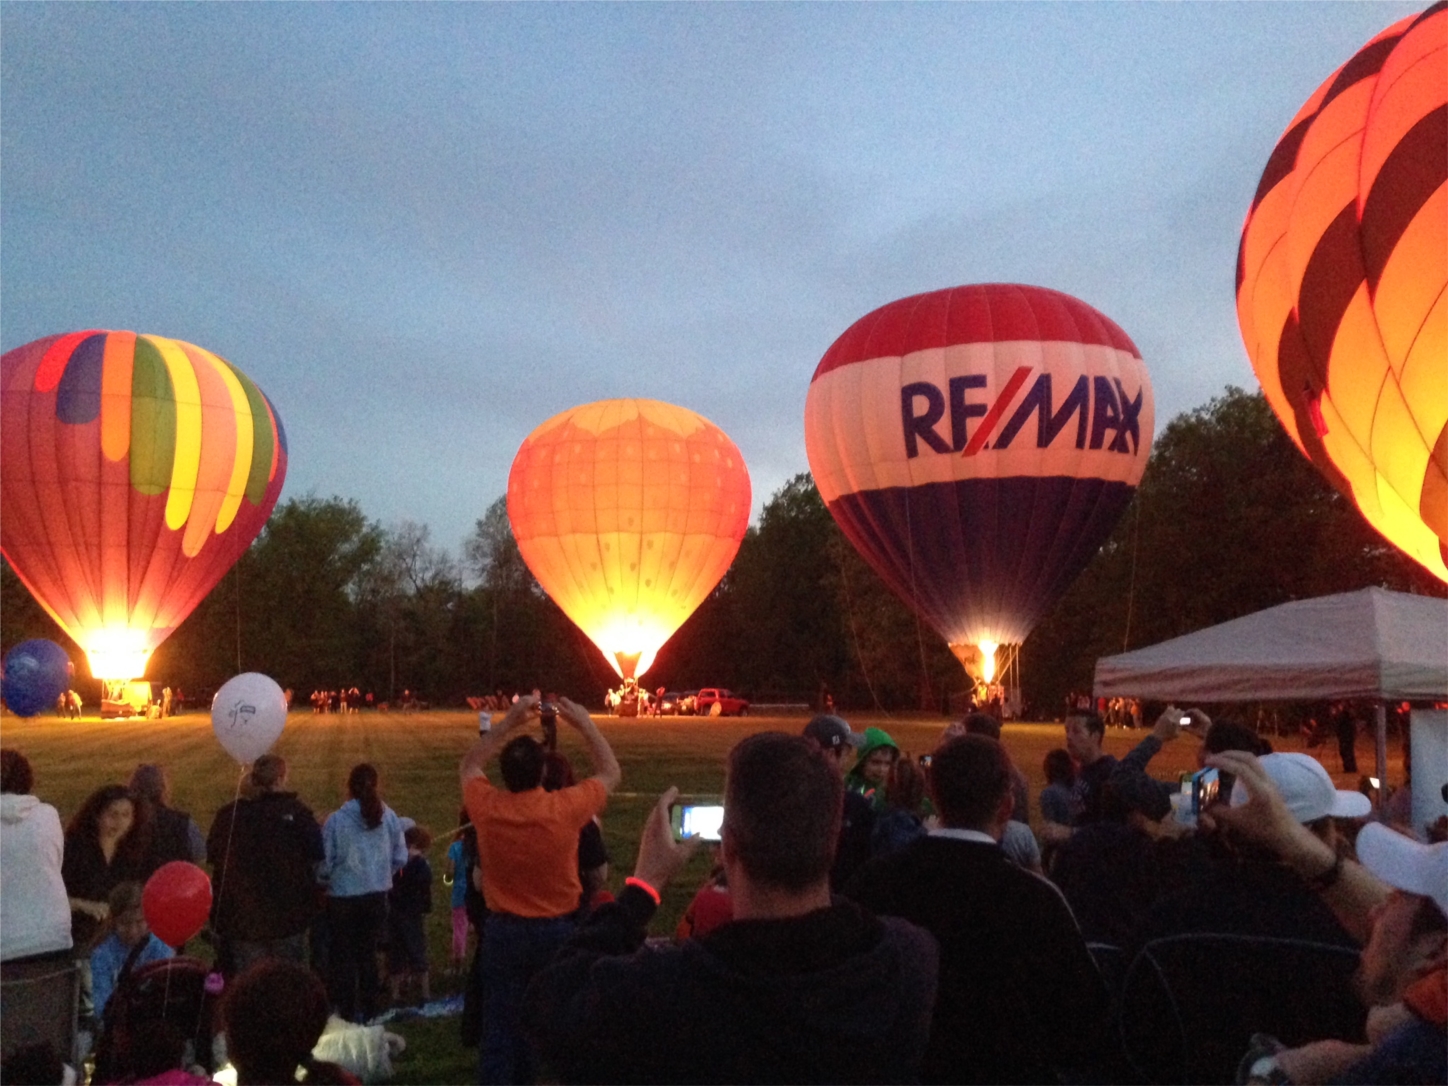 RE/MAX Balloon at our Annual Family Picnic at Balloon Glow, Blossom Time, Chagrin Falls